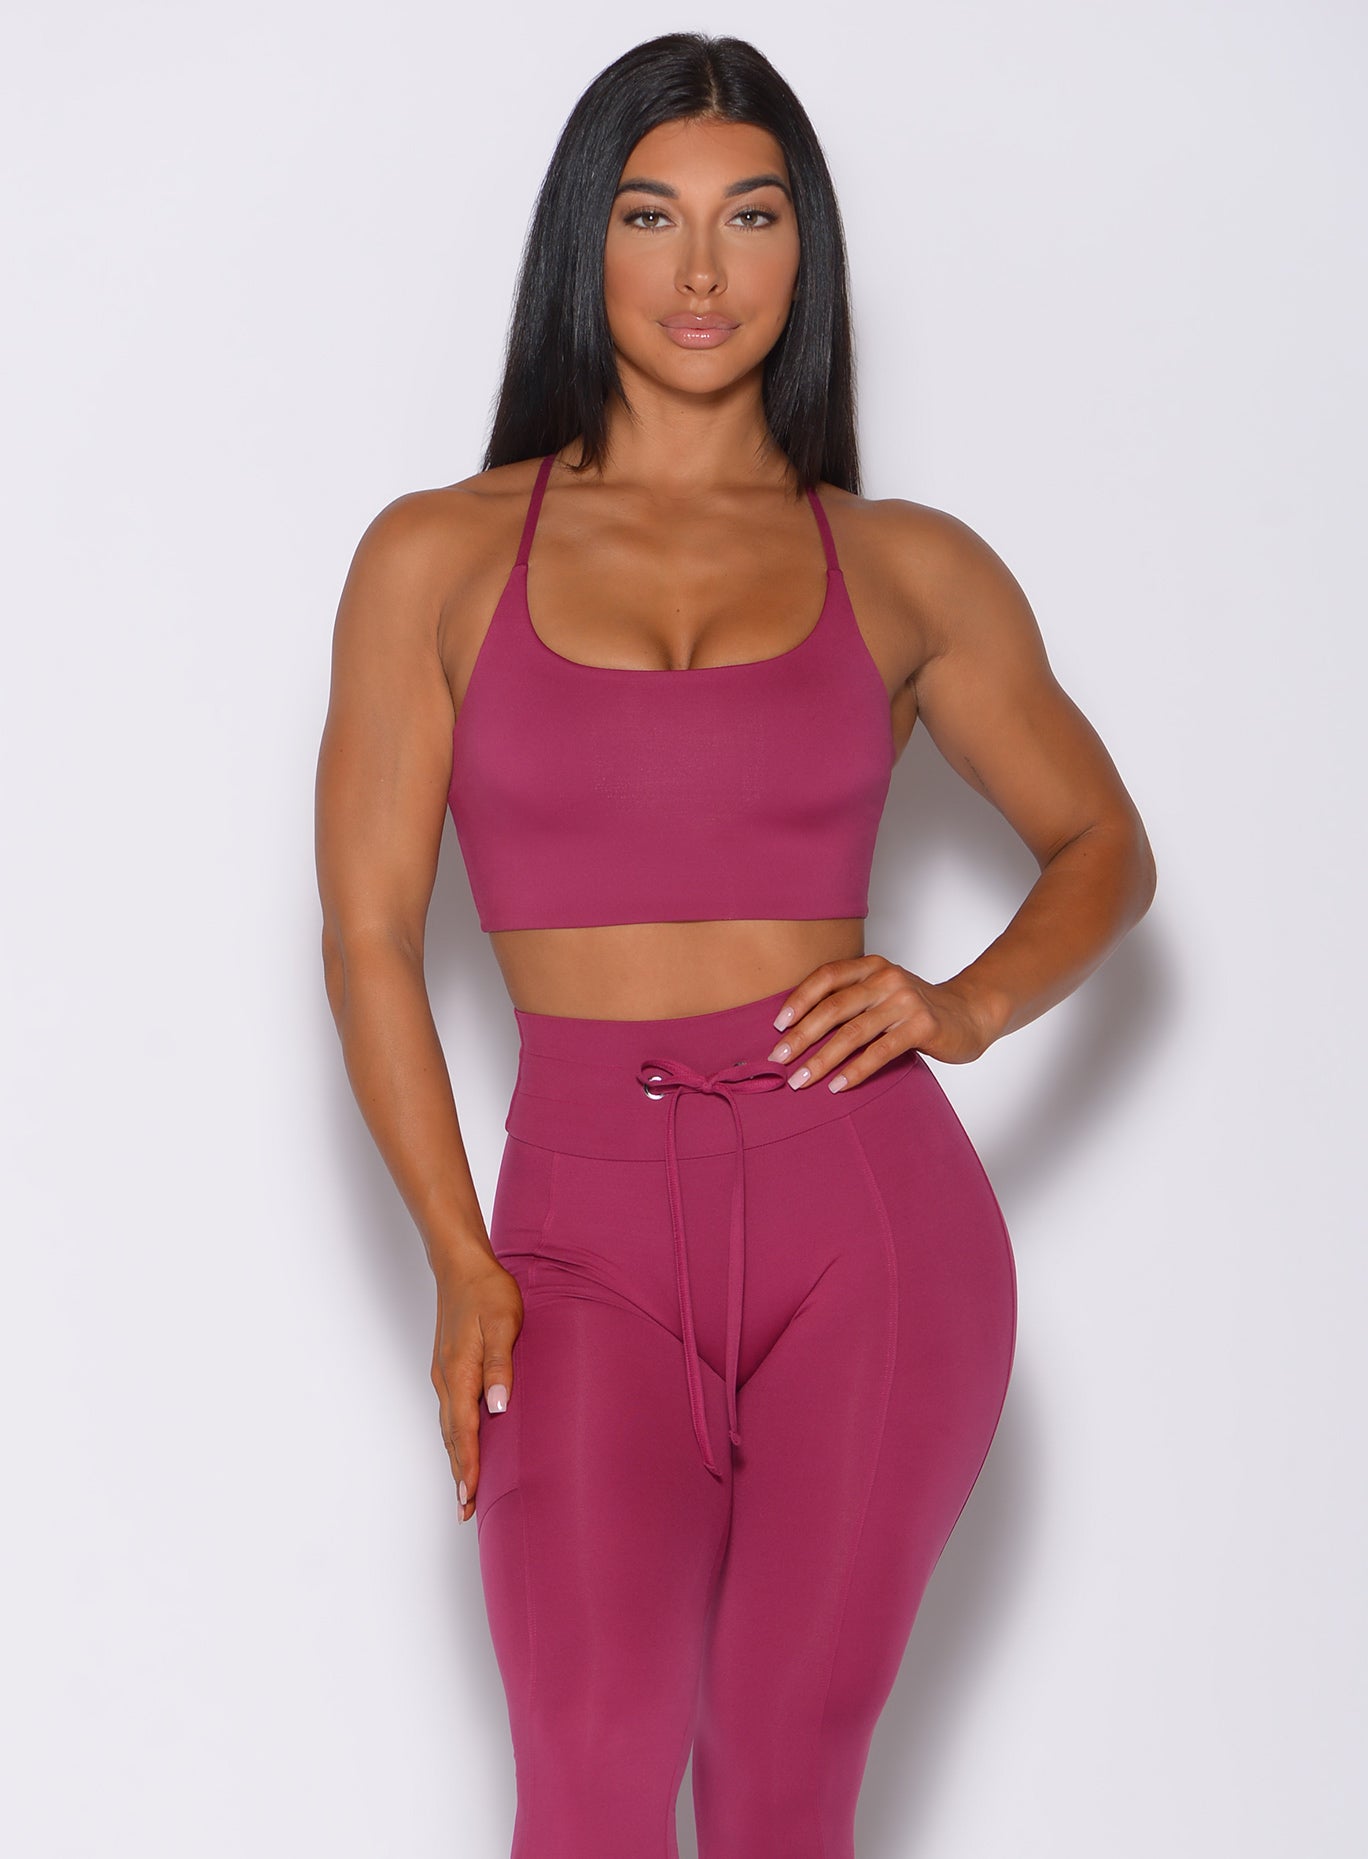 Front profile view of a model in our cross fit sports bra in berry good color and a matching leggings